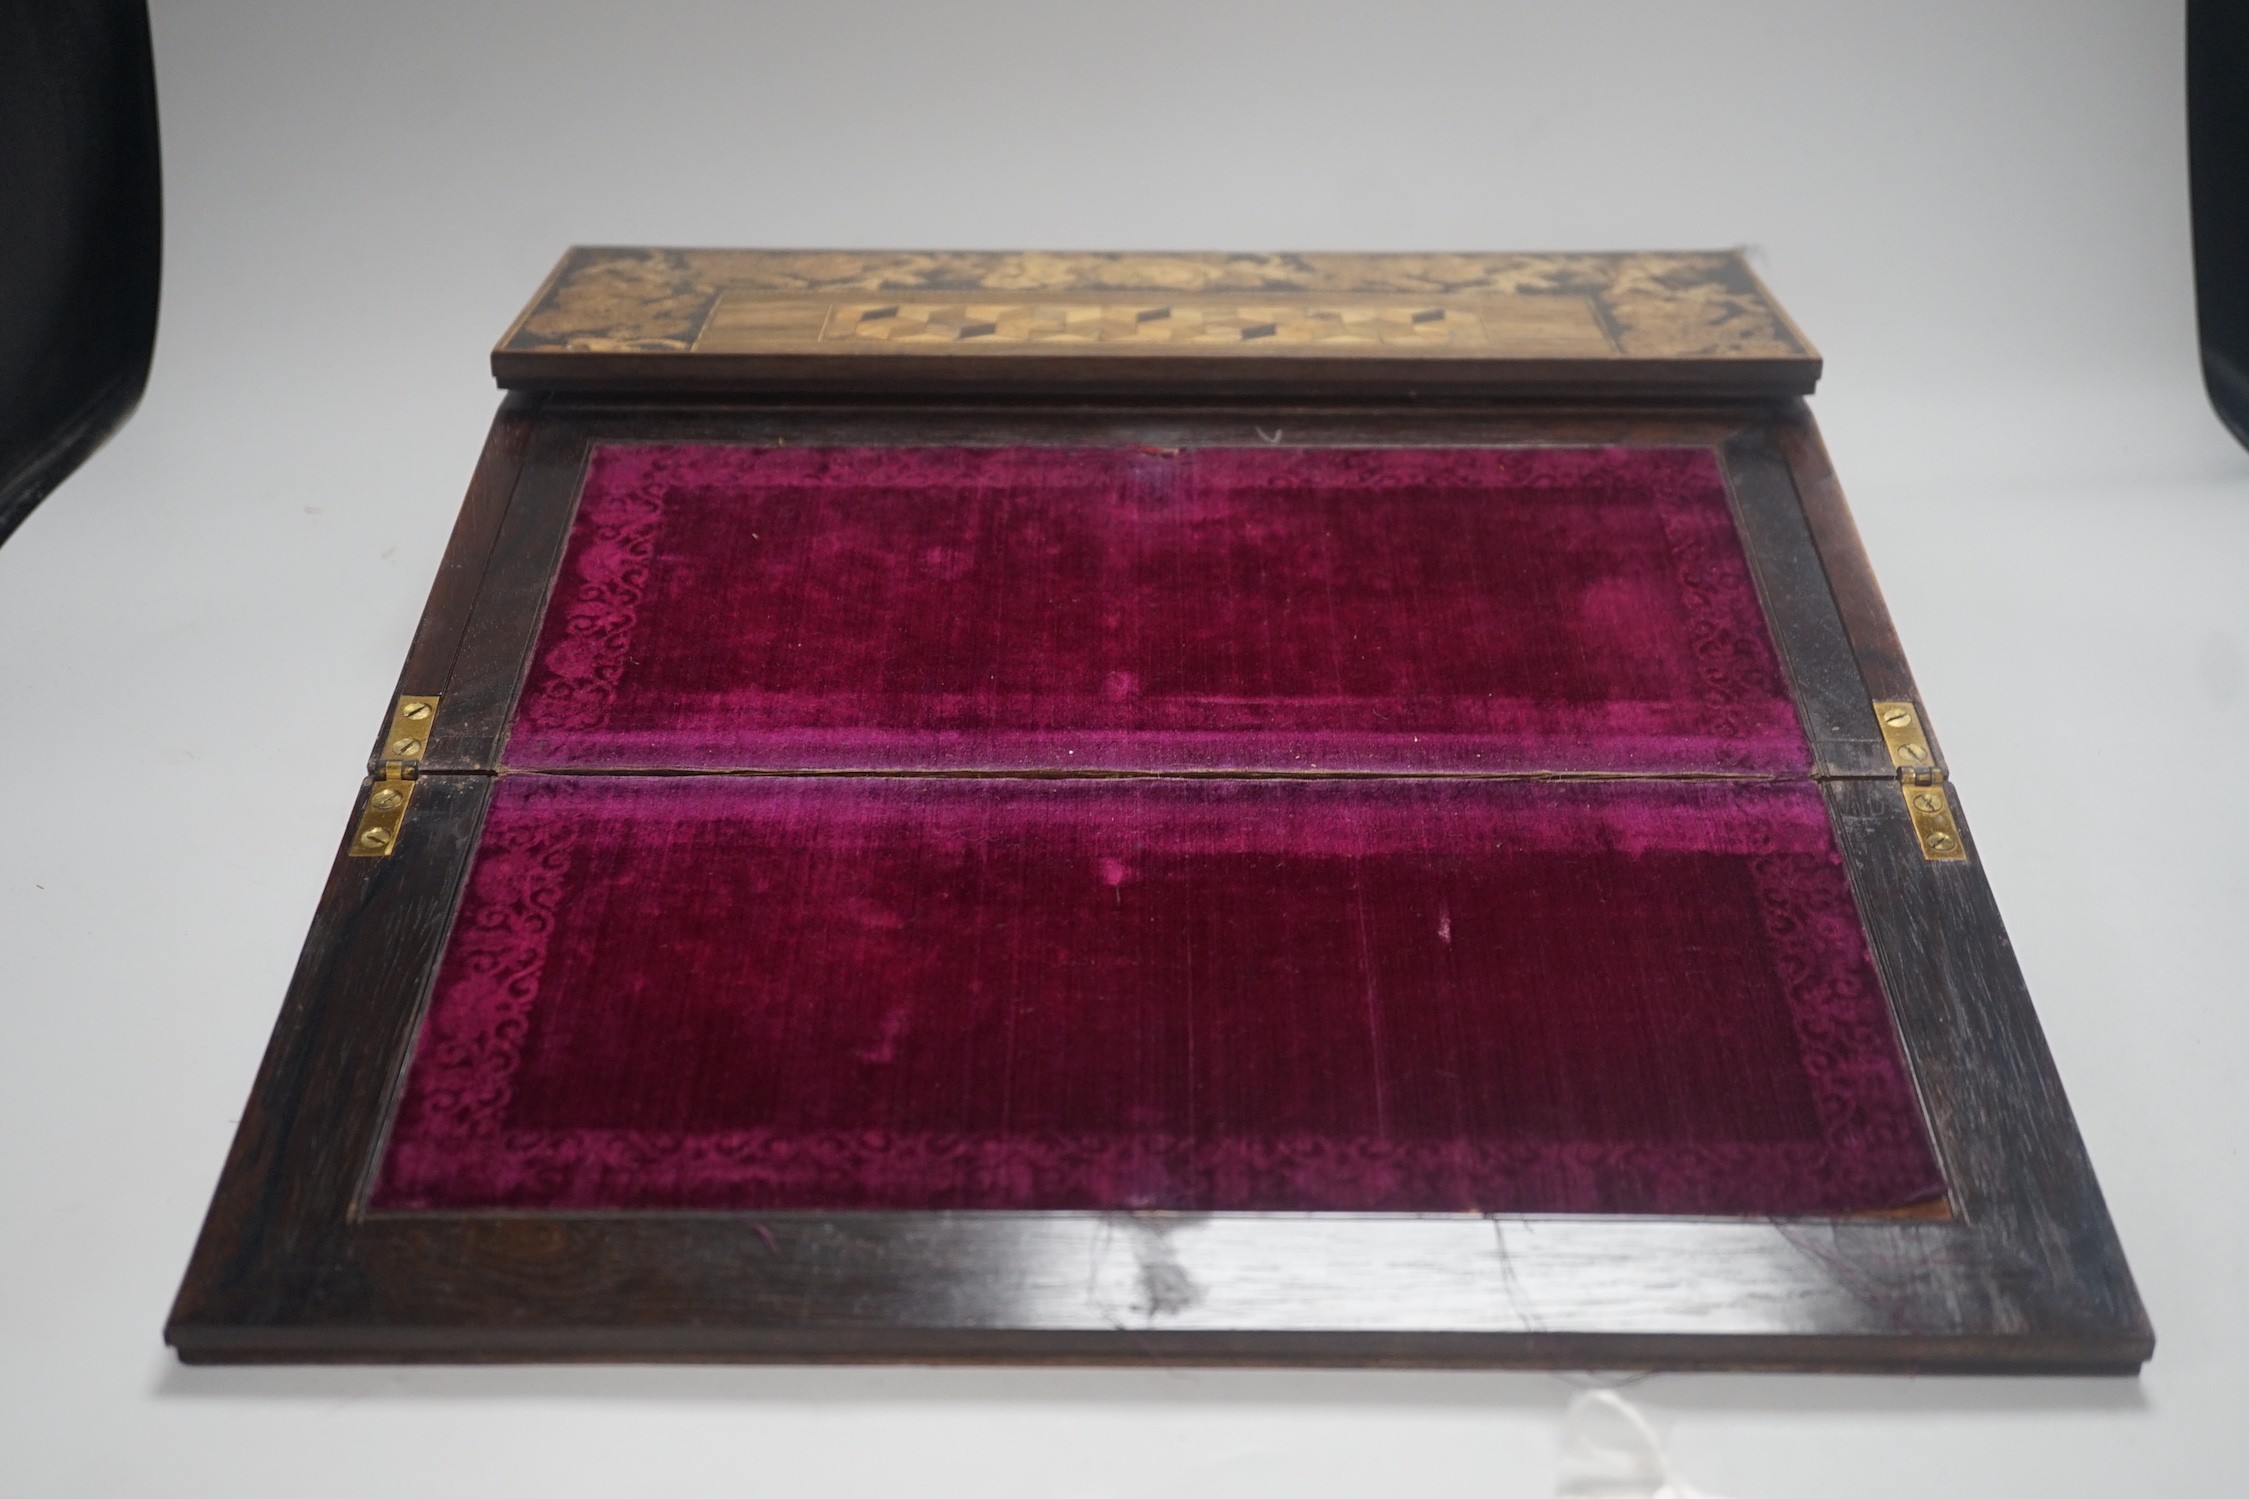 A Victorian Tunbridge ware rosewood writing slope, decorated with a tesserae mosaic view of Hever Castle, 39cm wide, with mosaic inlaid interior and covers to the glass inkwells.